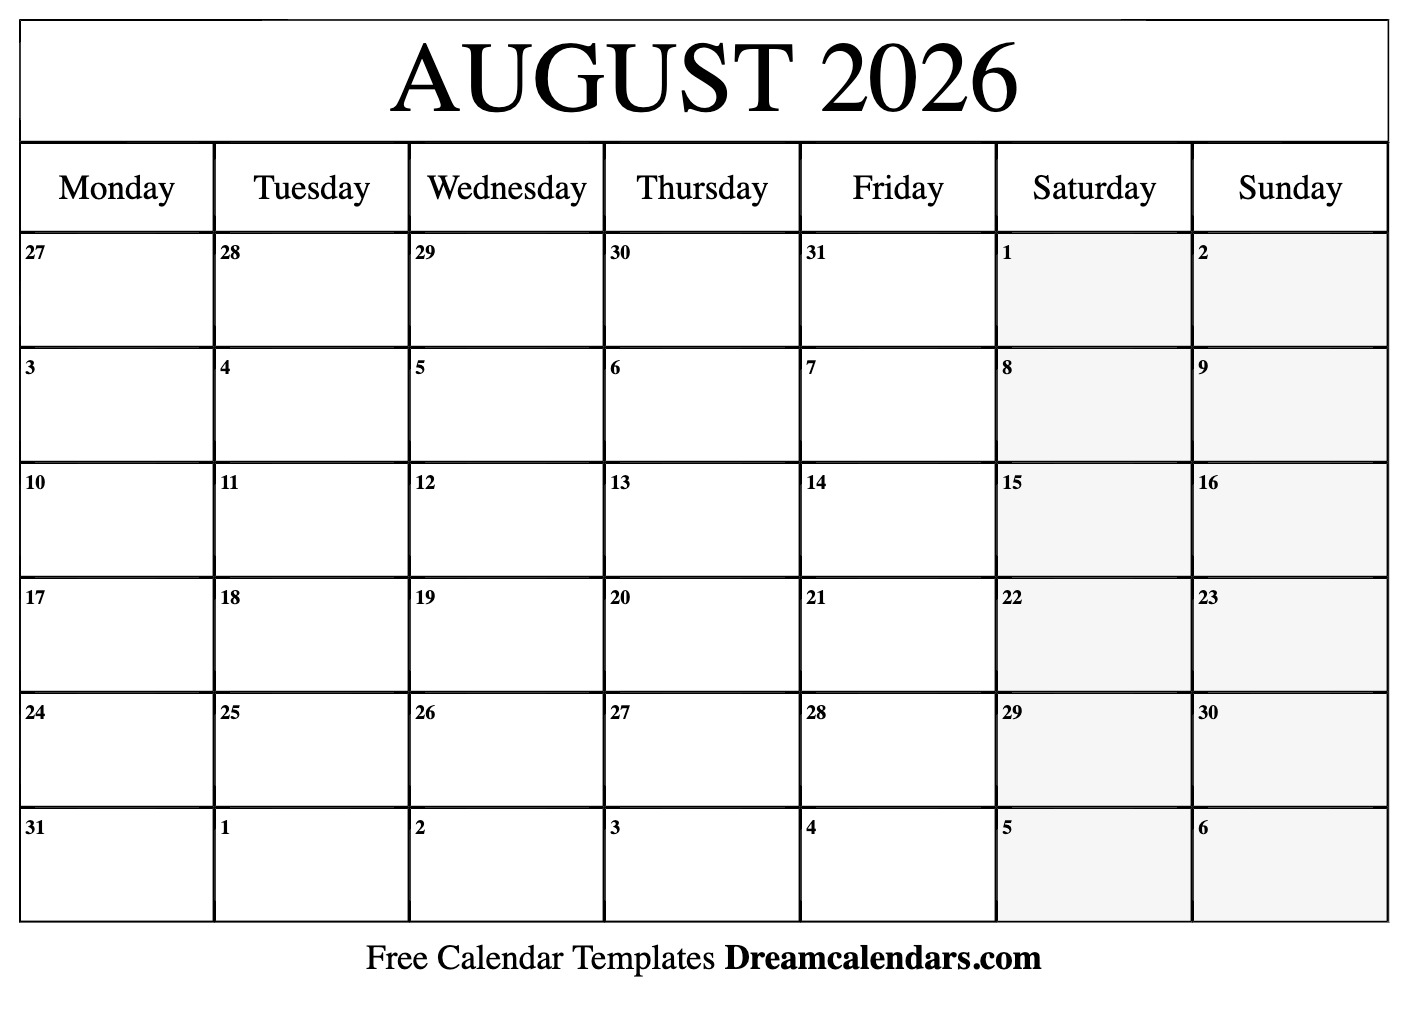 August 2026 calendar Free blank printable with holidays